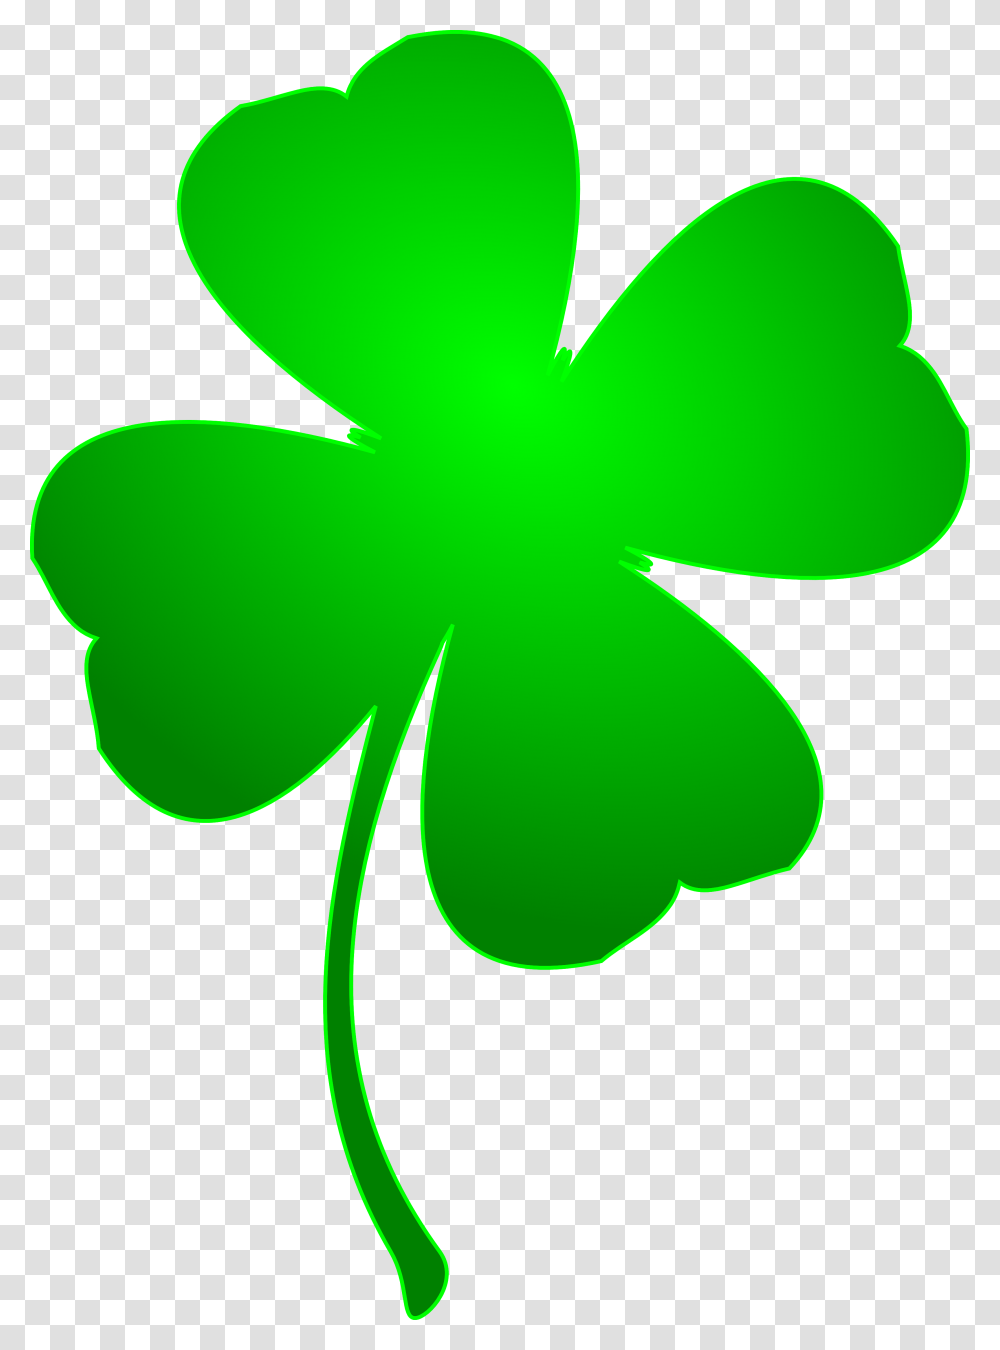 Top 23 Free Clover Flower Images Free St Day, Green, Logo, Symbol, Trademark Transparent Png